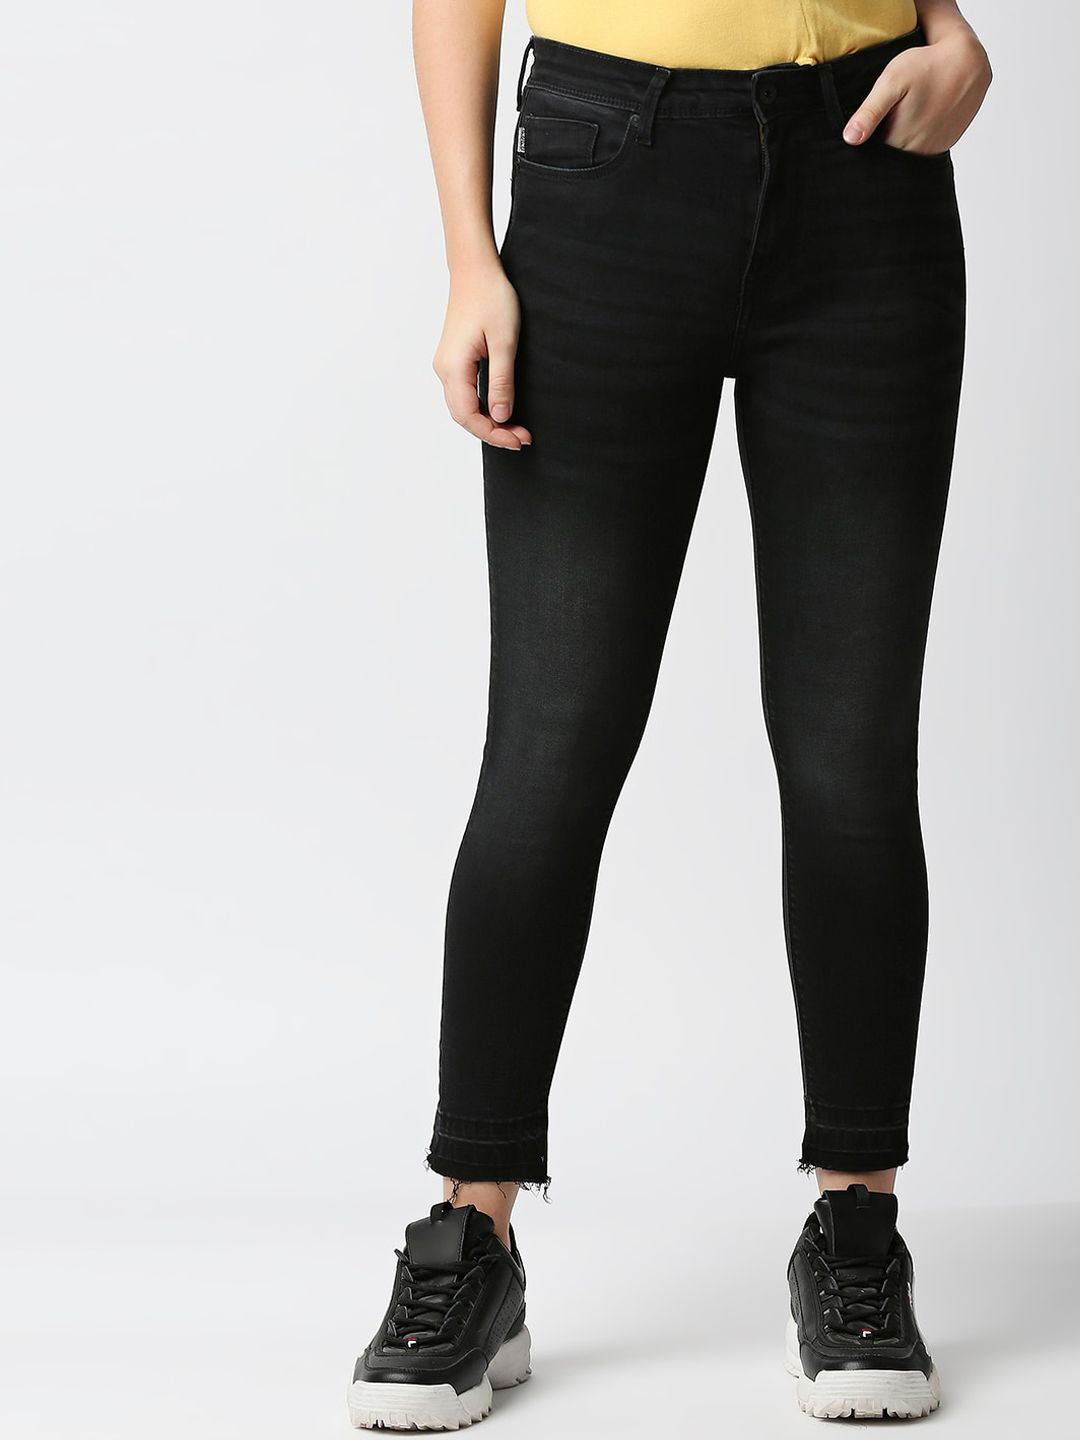 Pepe Jeans Women Black Skinny Fit High-Rise Jeans Price in India